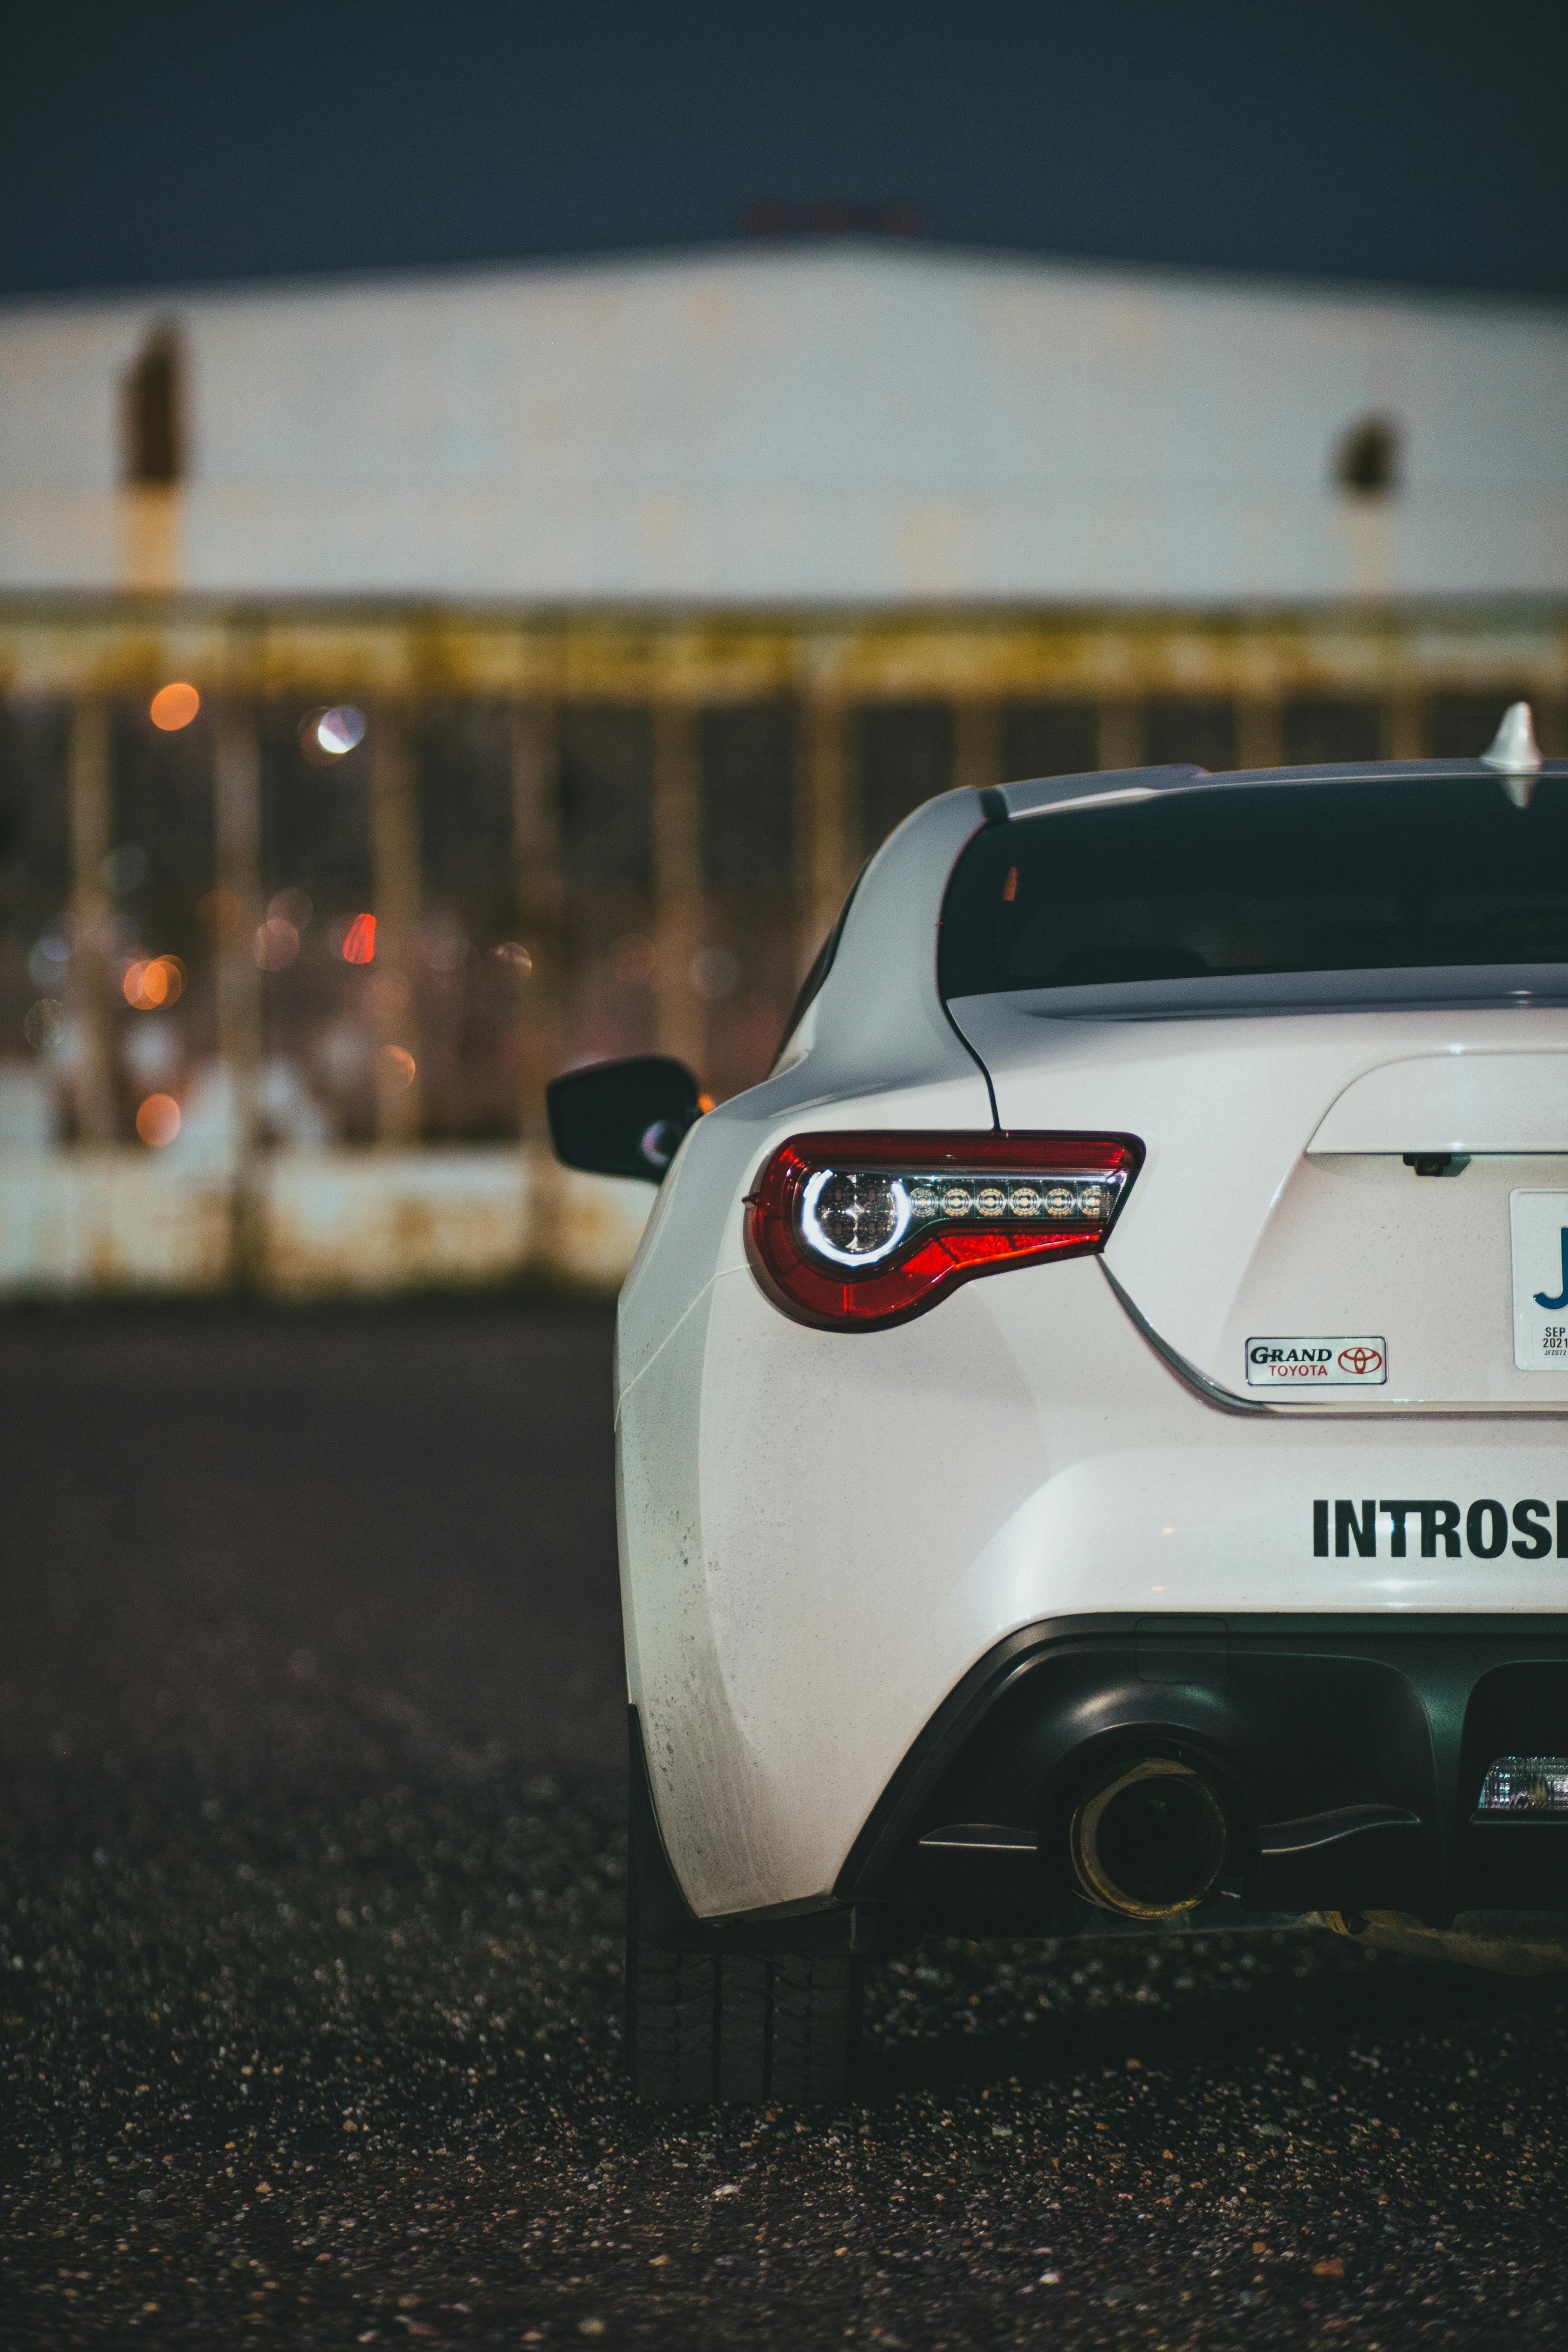 Free download Related toyota gt86 iPhone wallpapers themes and backgrounds  640x960 for your Desktop Mobile  Tablet  Explore 49 Subaru BRZ iPhone  Wallpaper  Subaru Wallpaper Subaru Logo Wallpaper Subaru Impreza  Wallpaper